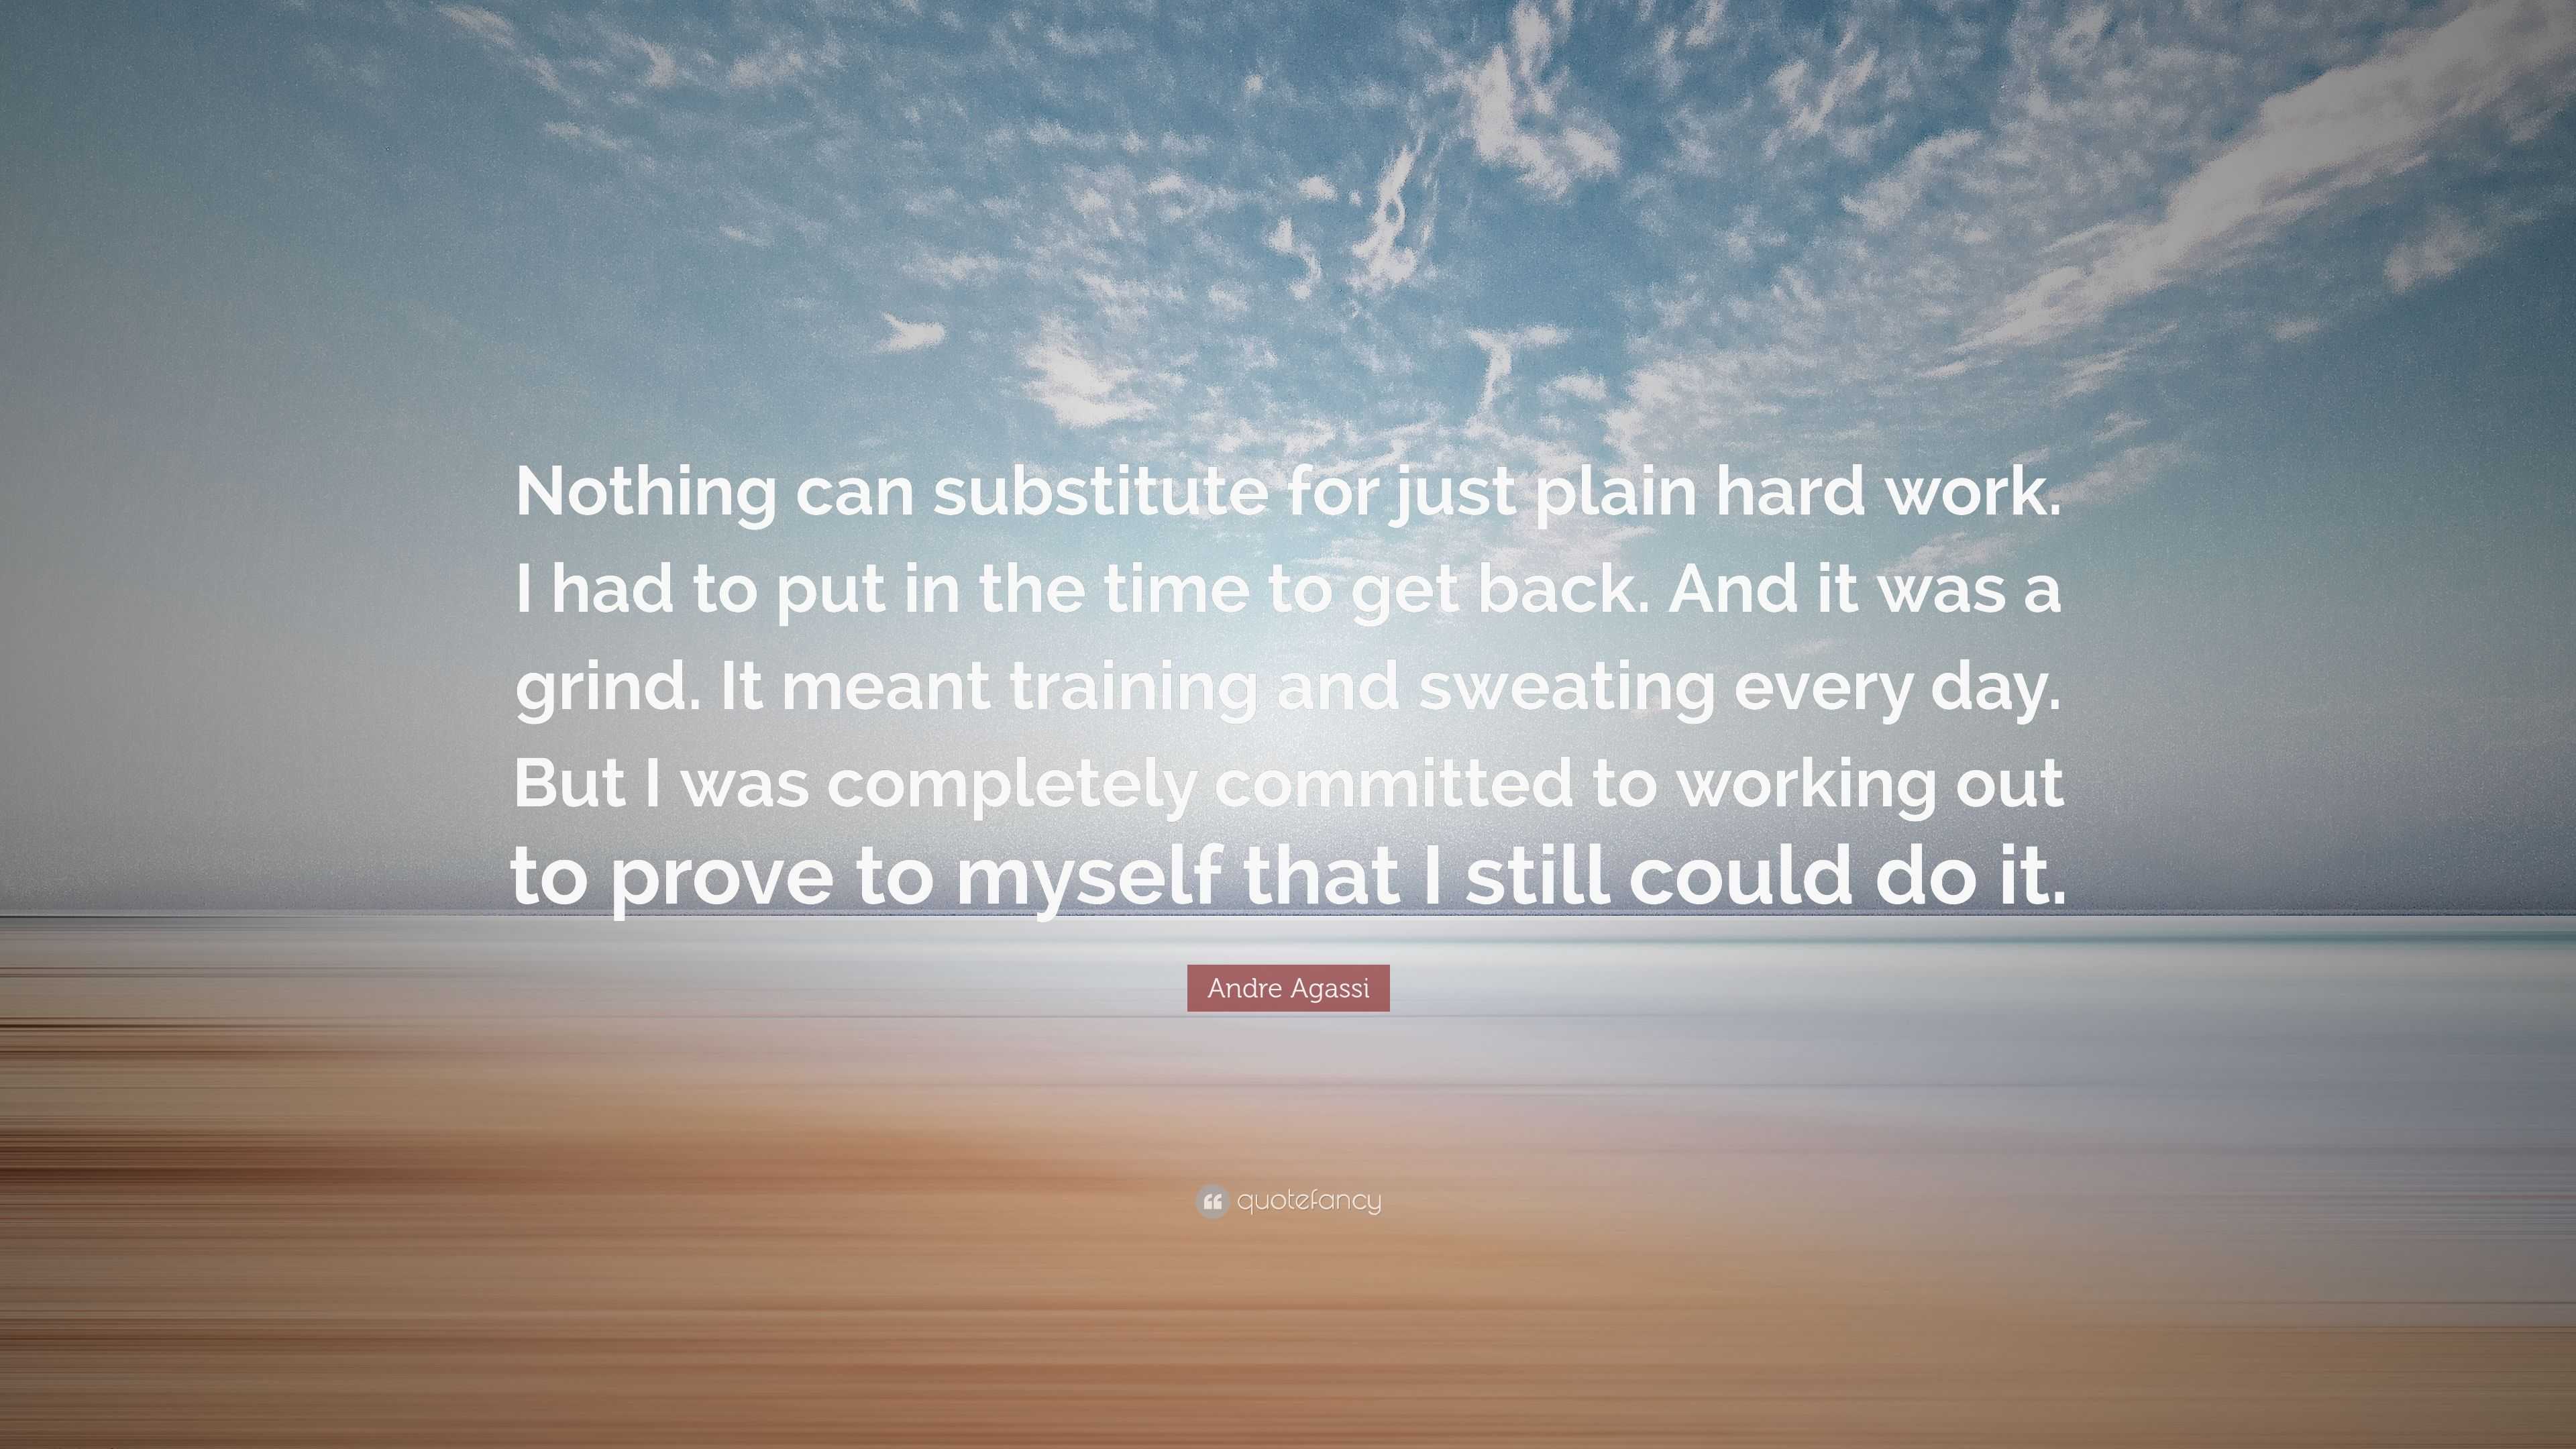 Andre Agassi Quote: “Nothing can substitute for just plain hard work. I ...